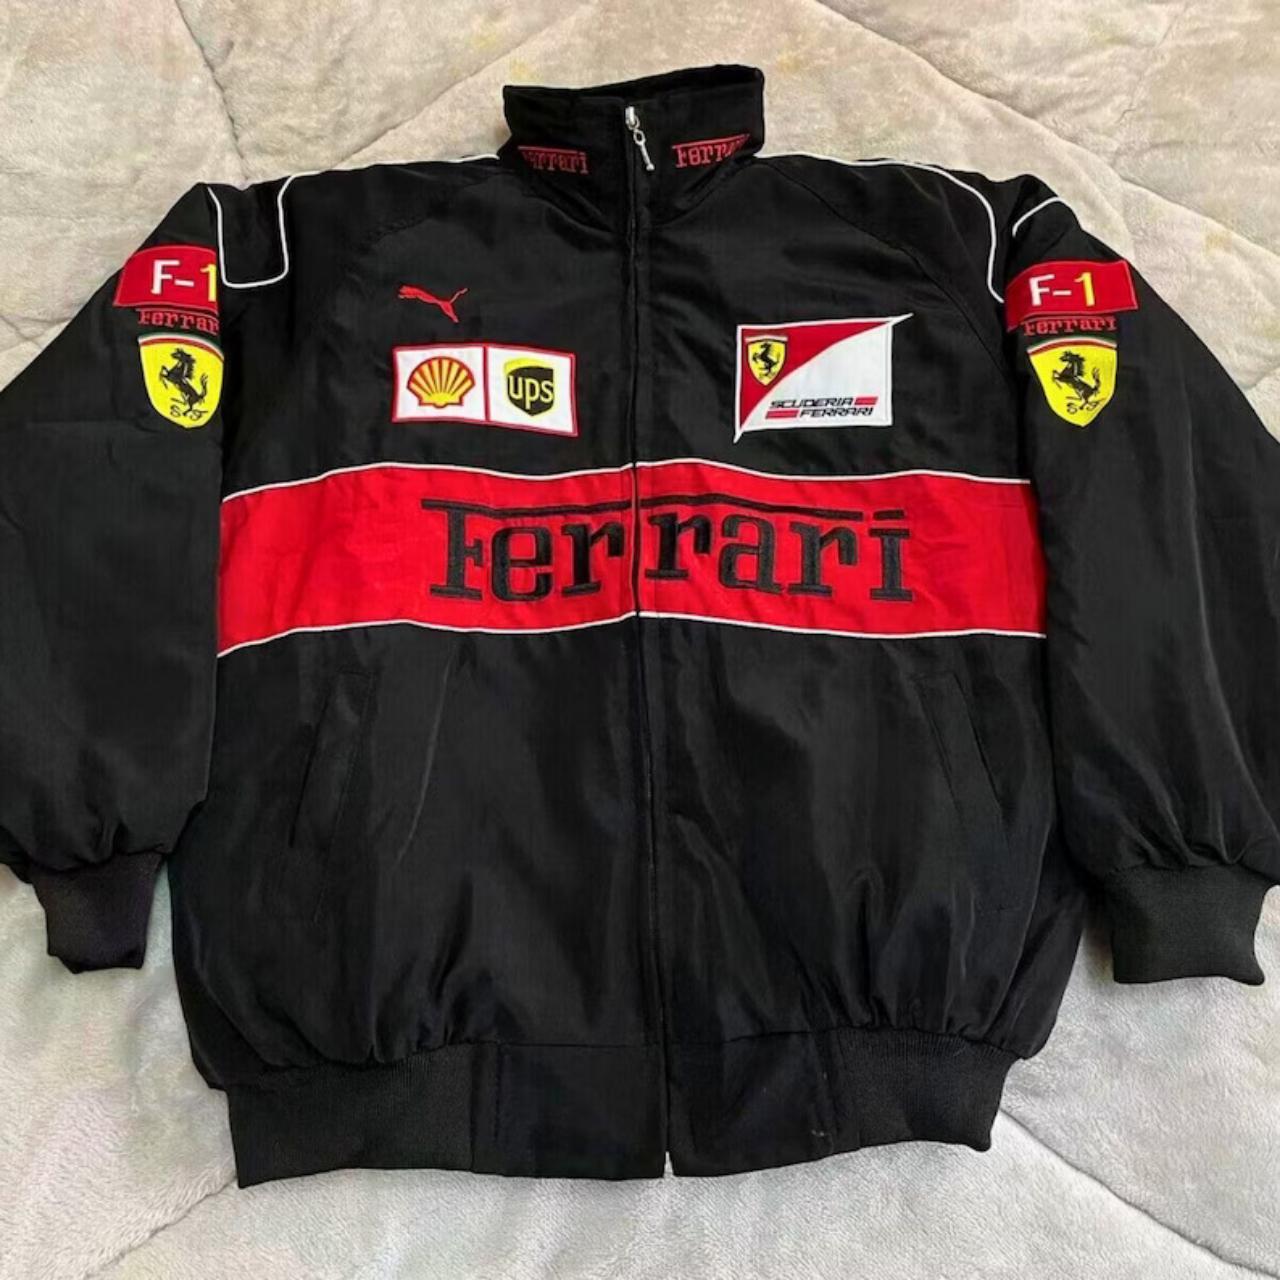 Introducing the Vintage Black and Red Ferrari... - Depop